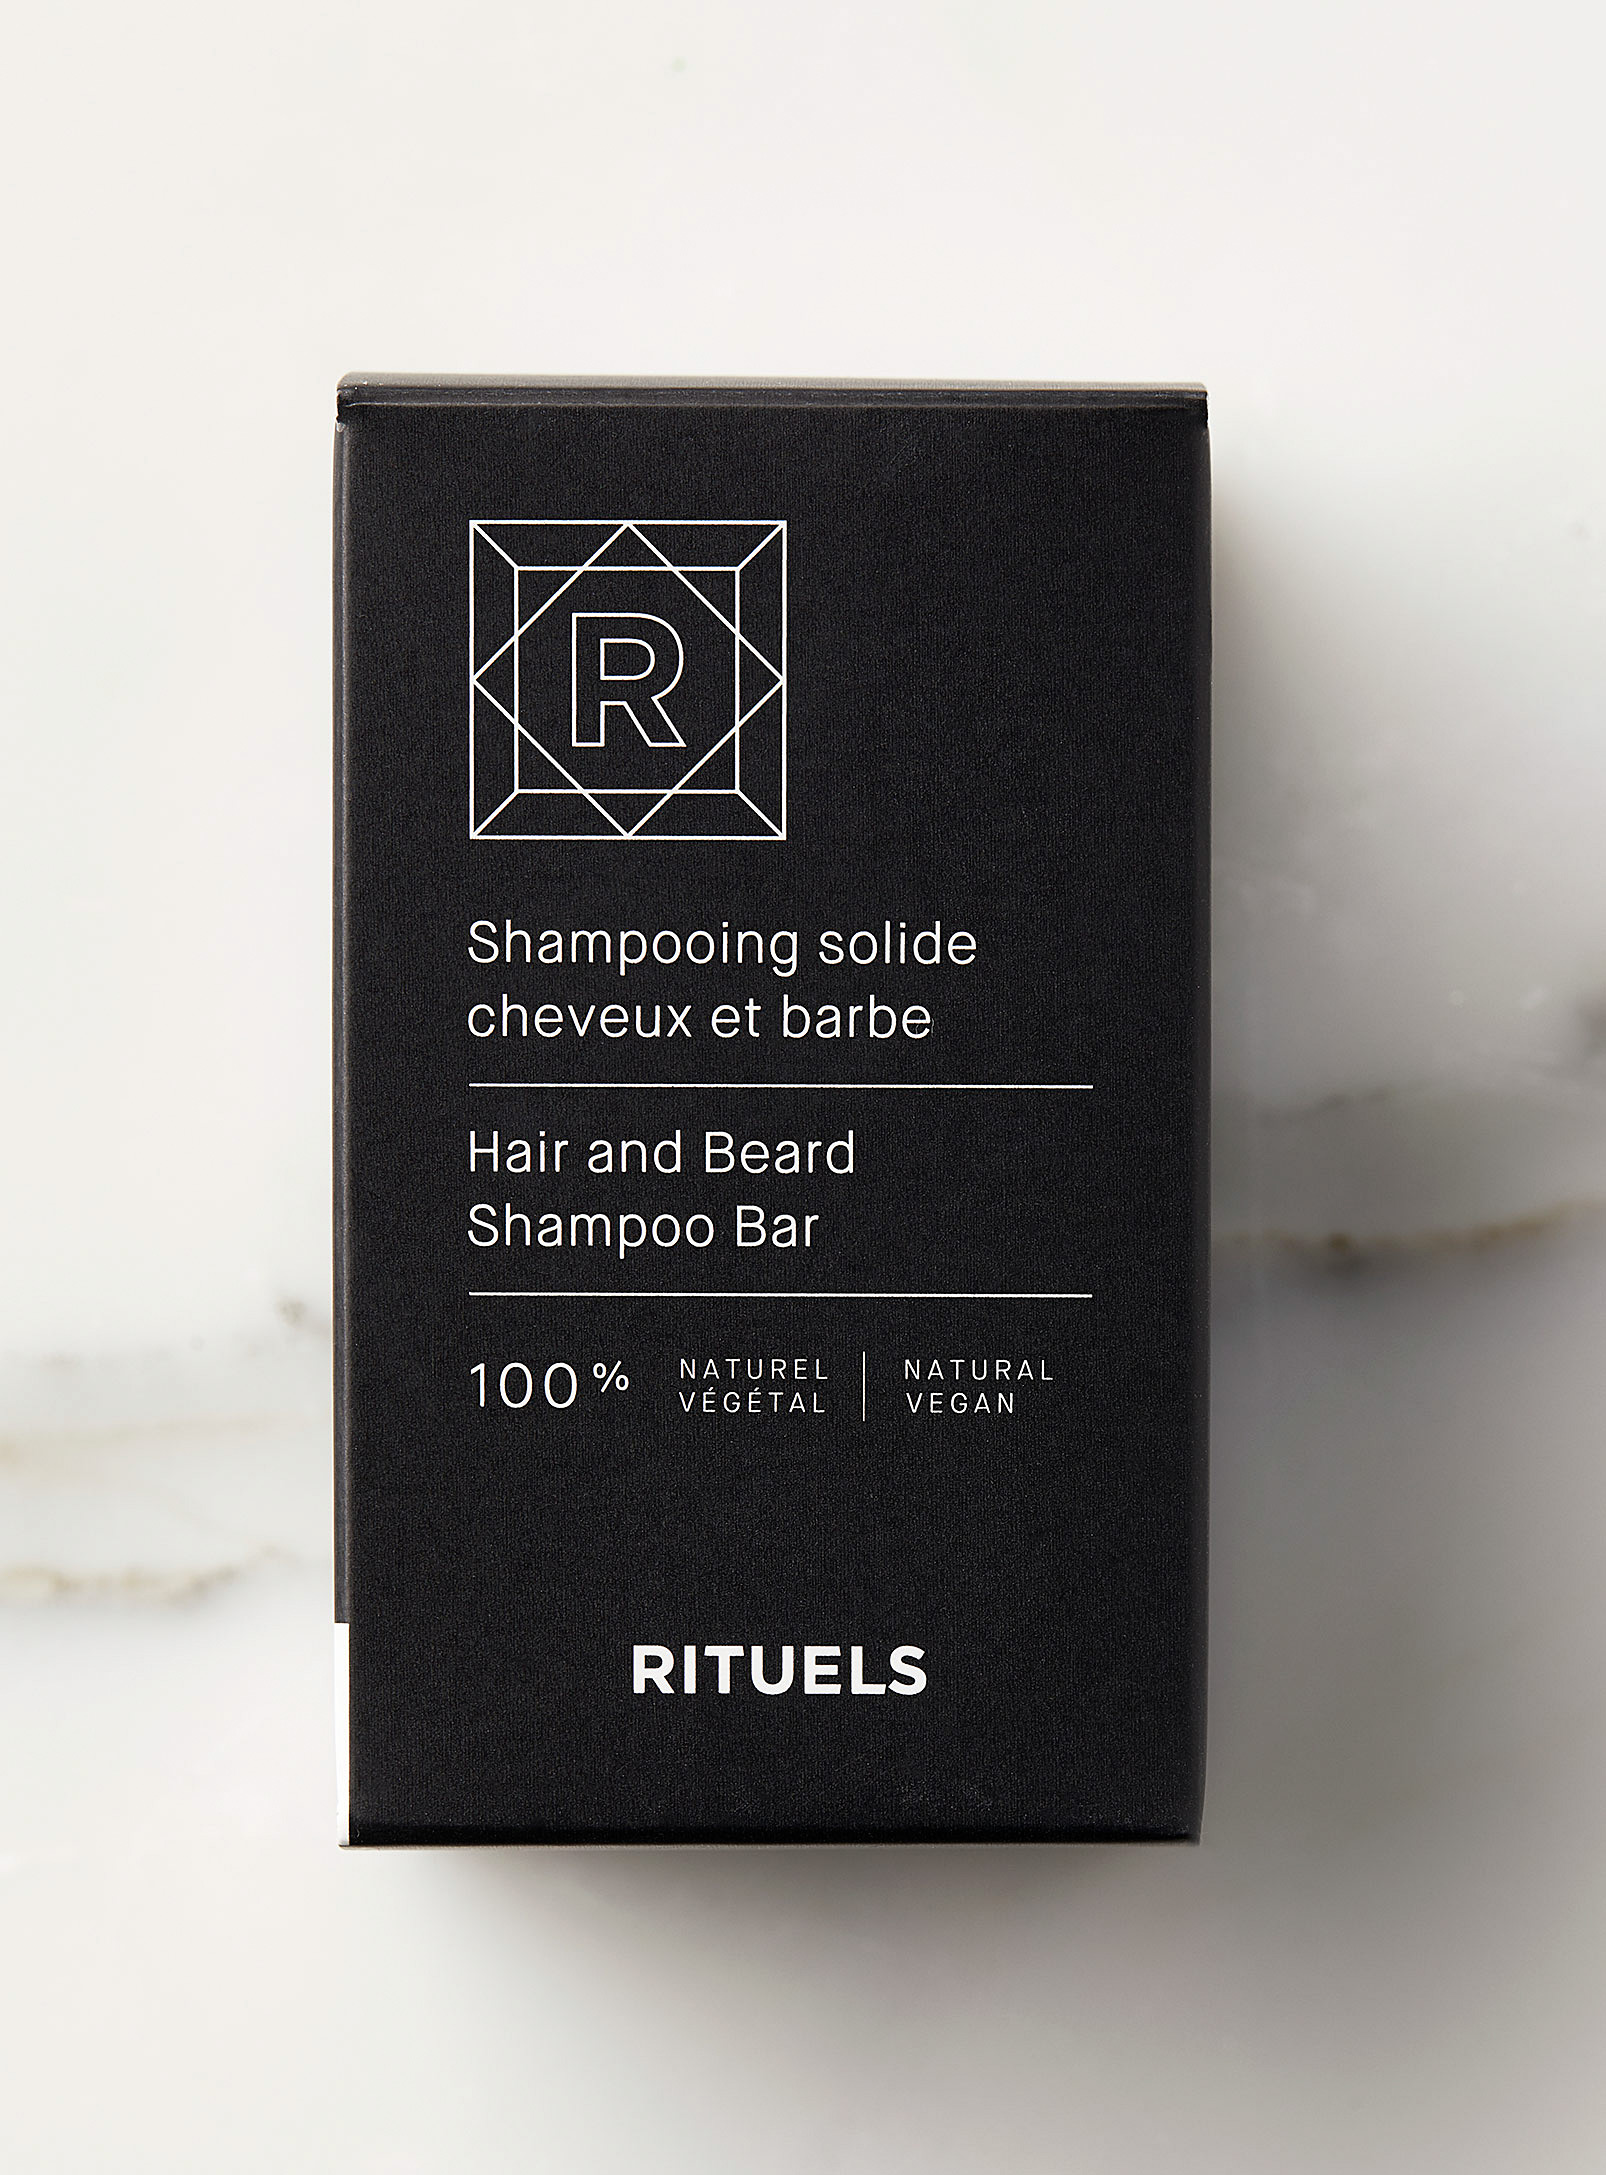 Rituels - Le shampoing solide cheveux et barbe